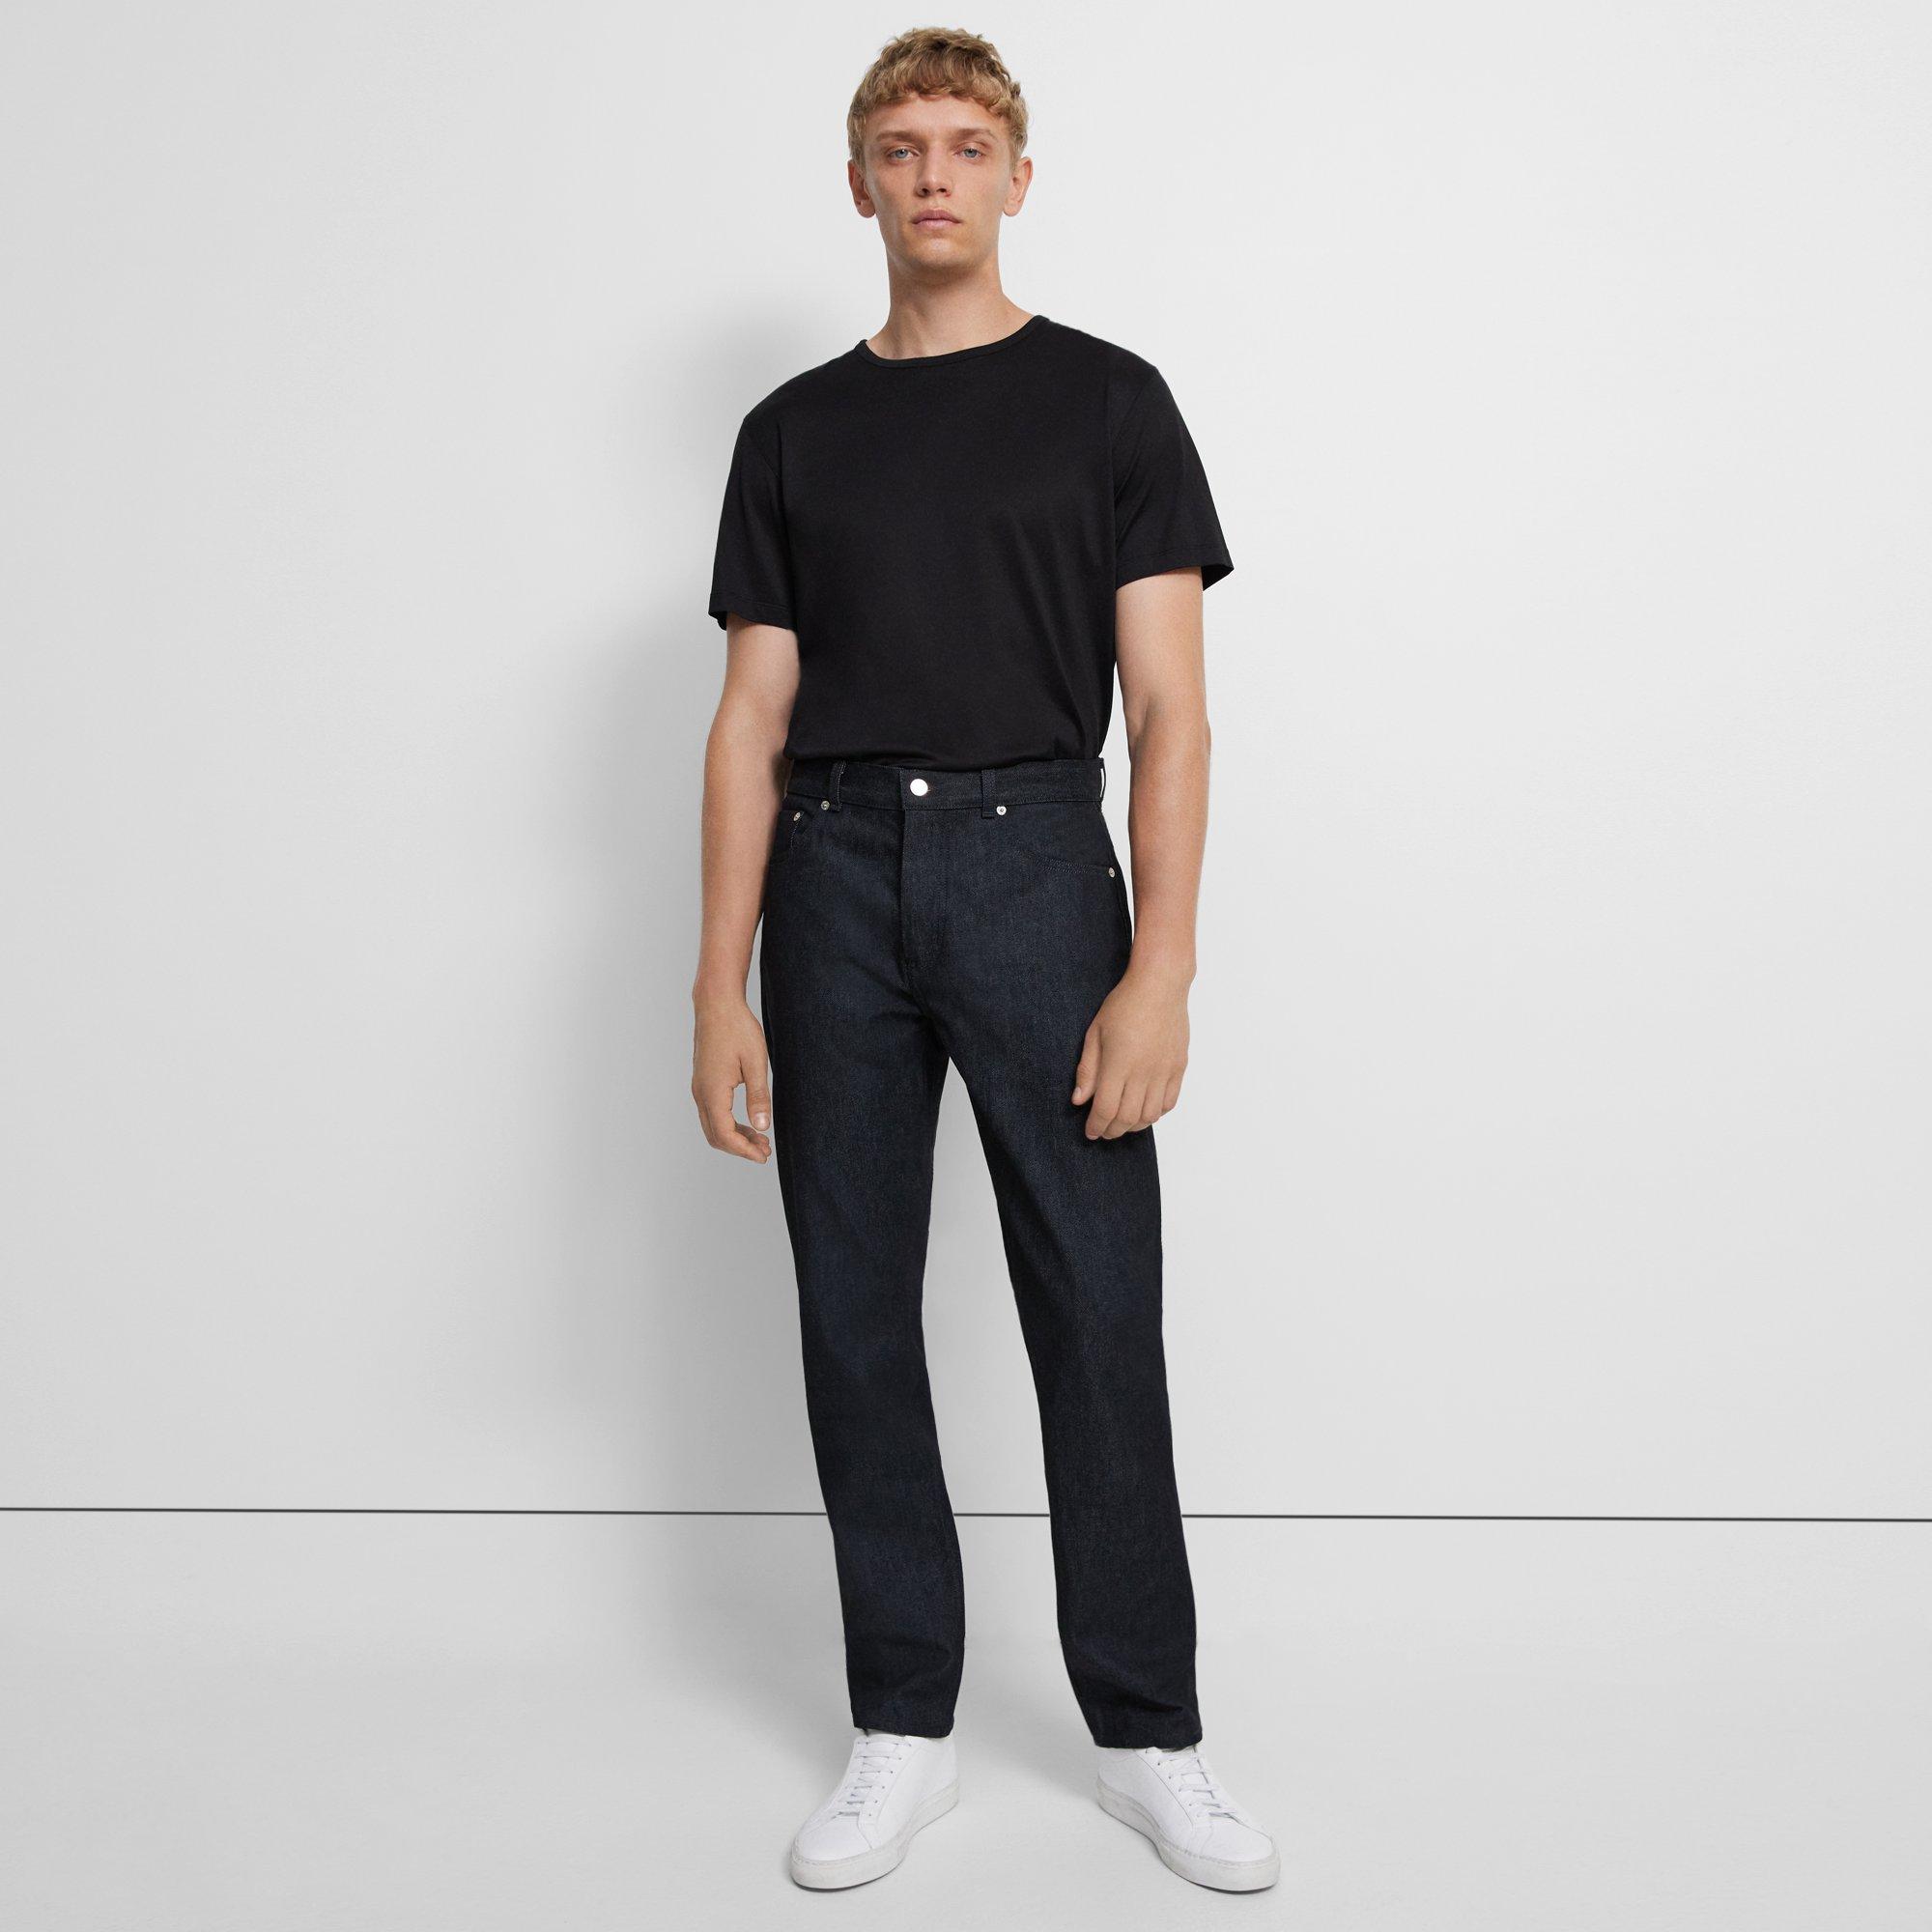 Theory Helmut Lang And Uniqlo Classic Cut Jean In Denim In Black